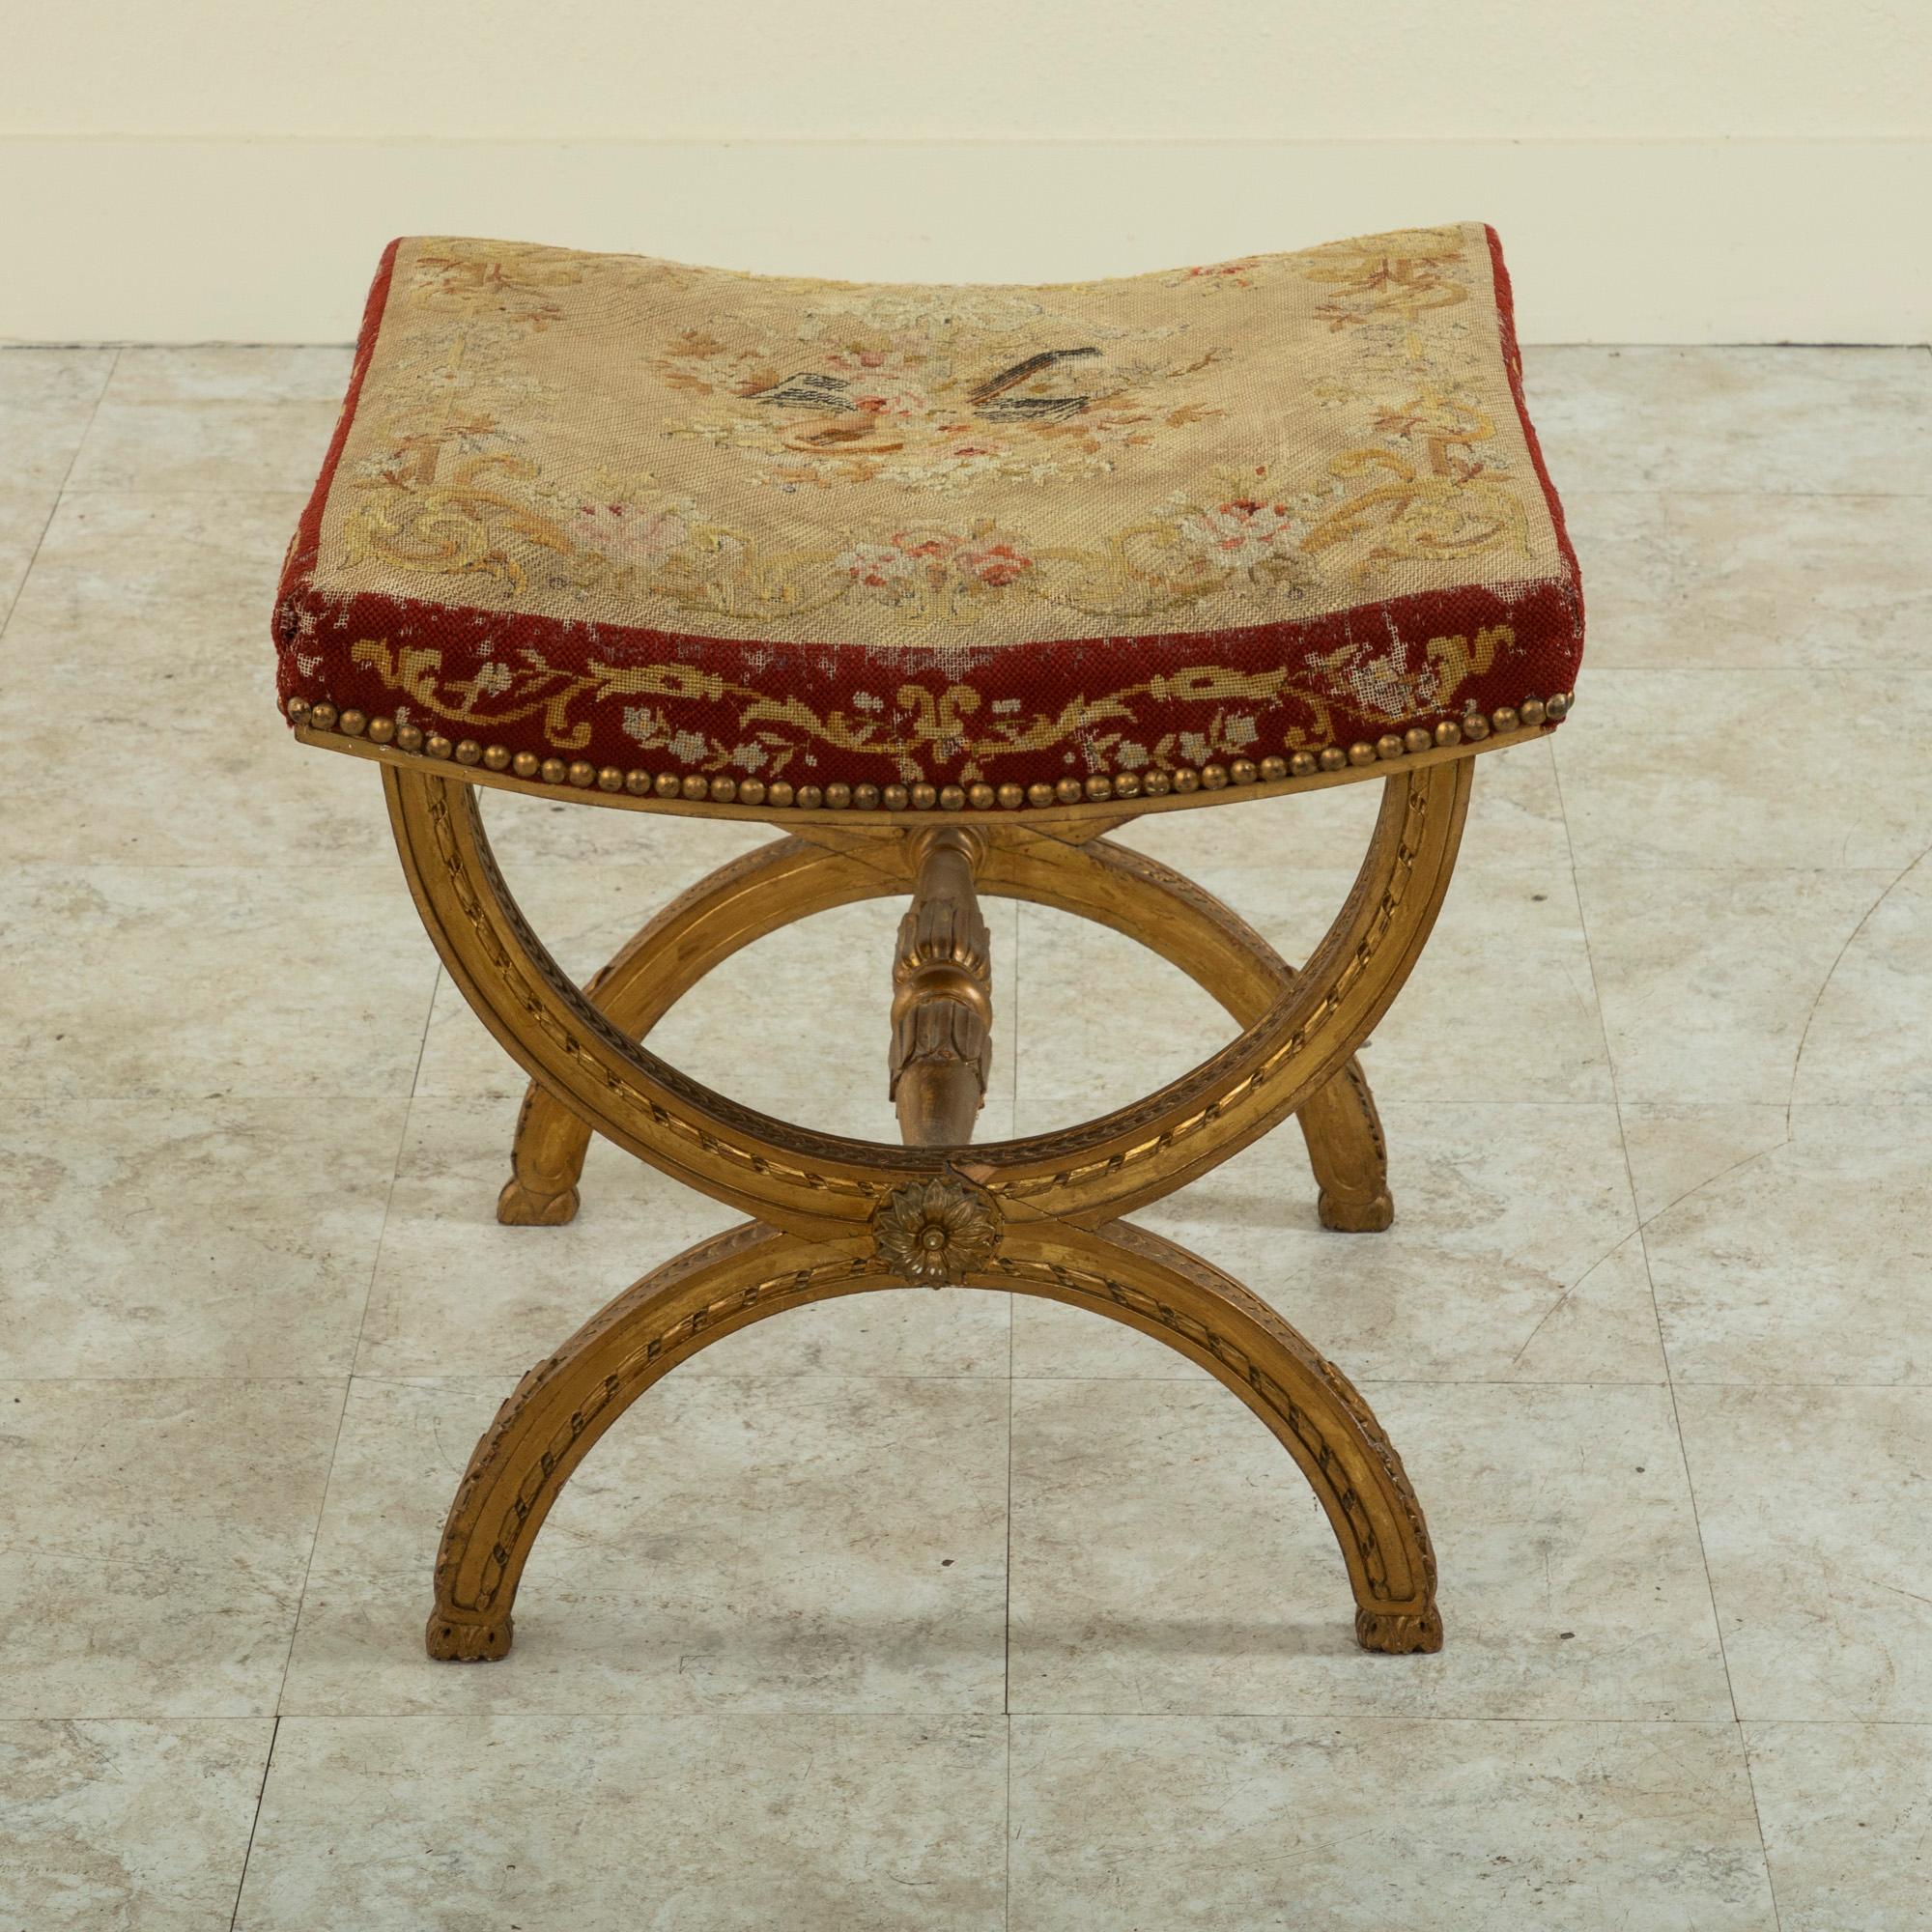 This mid-nineteenth century Louis XIV style vanity stool or bench features a gilt wood base formed by opposing half circles. The legs are detailed with acanthus leaves, a twisted ribbon motif, and an overlapping quatrefoil pattern. A stretcher with